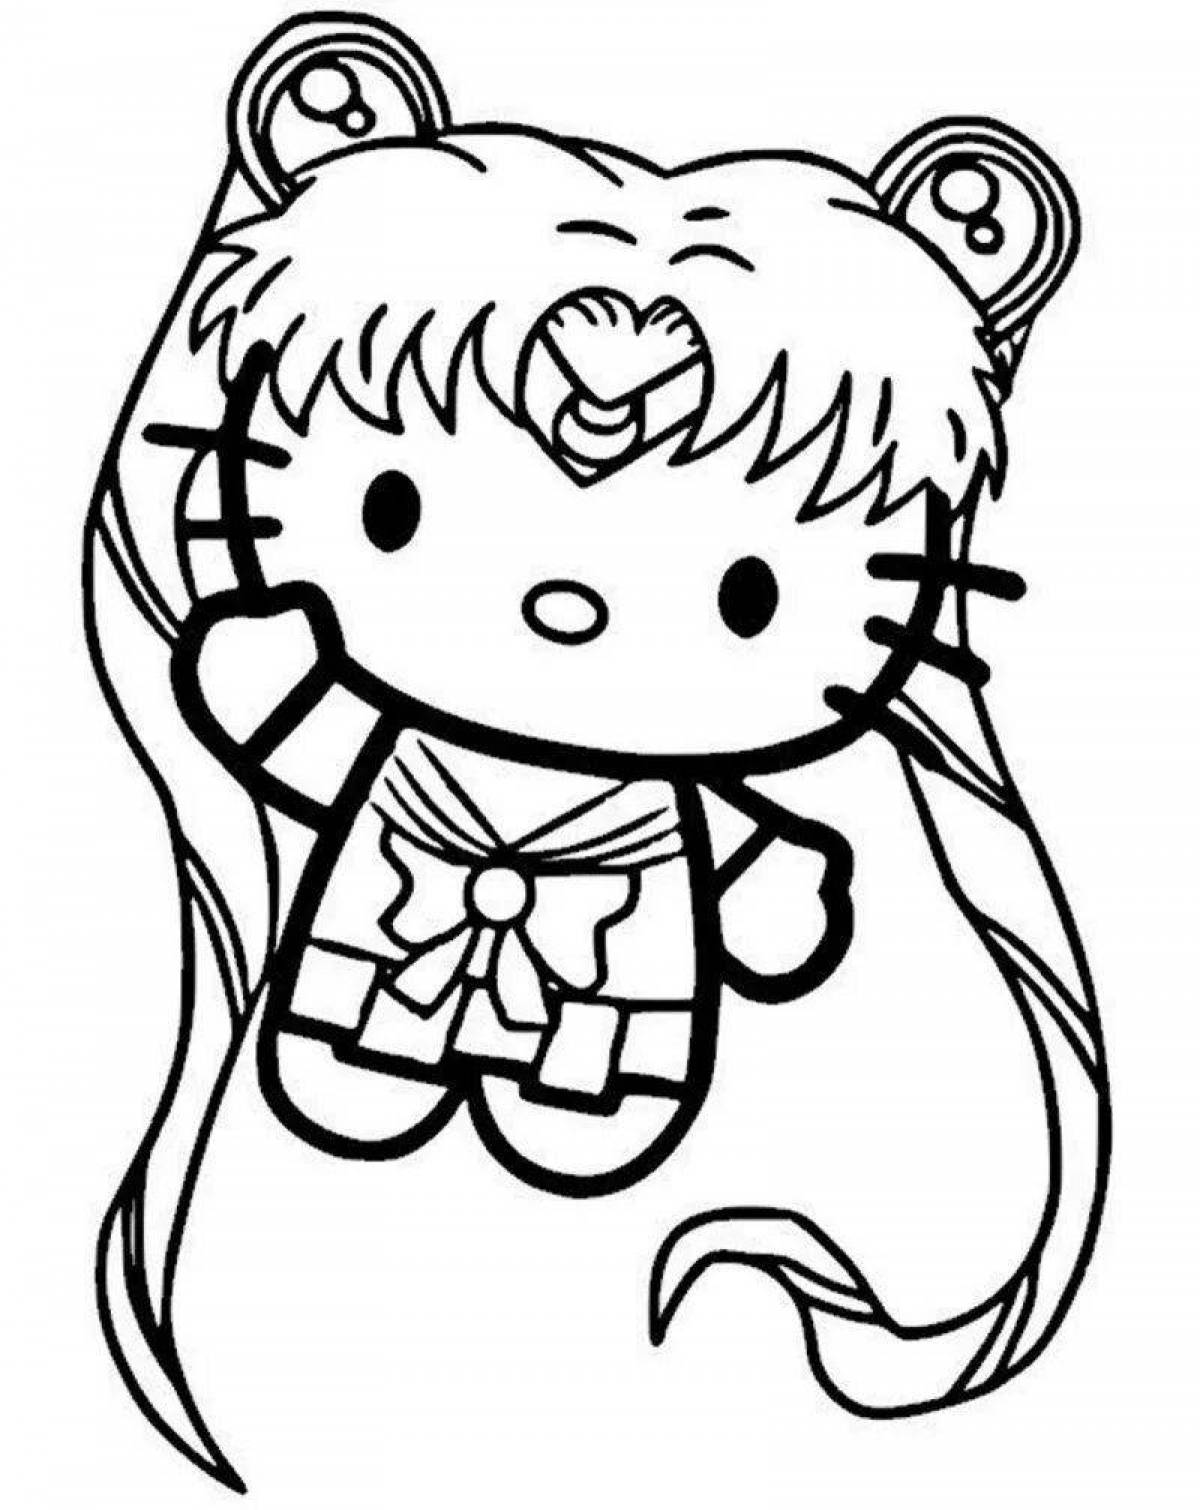 Cute hello kitty sticker coloring page